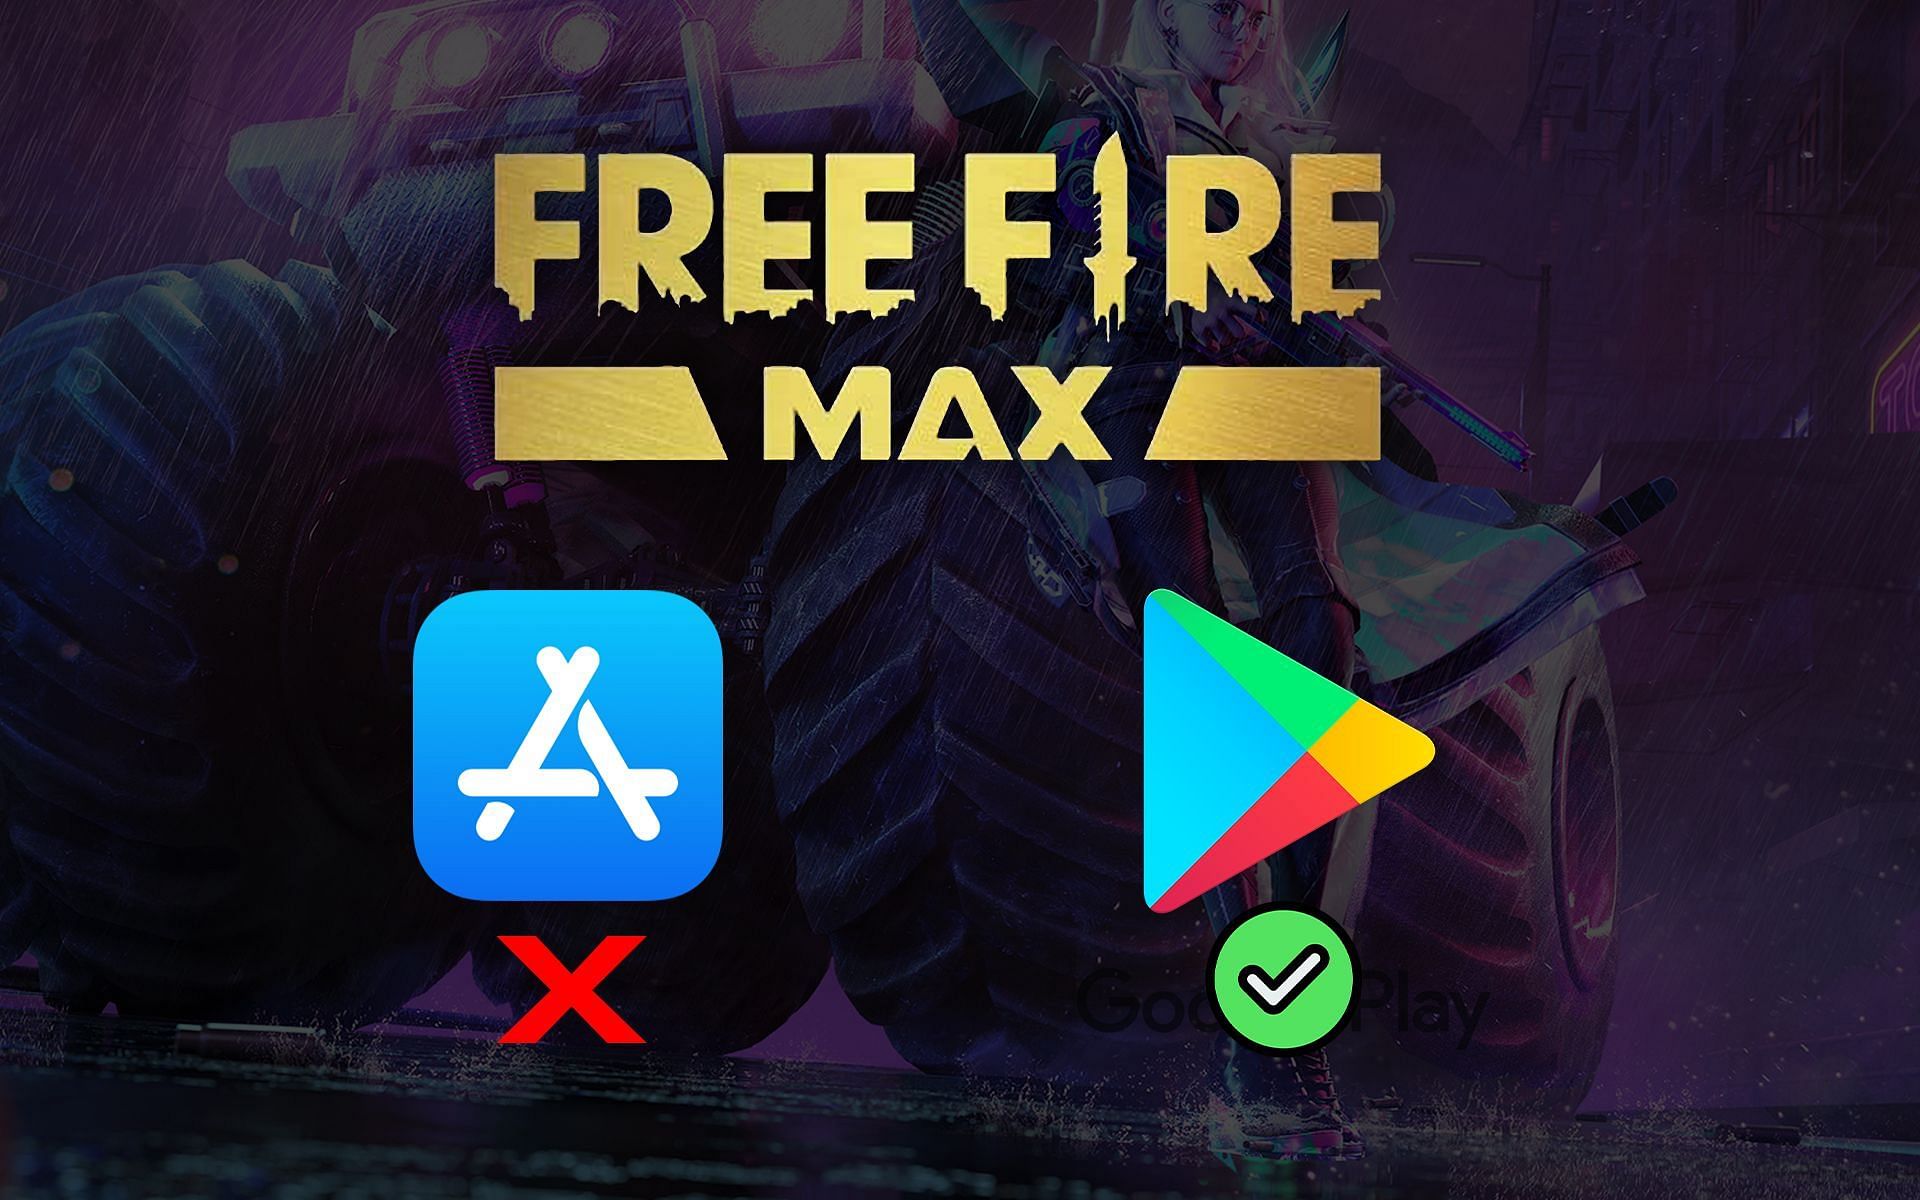 Free Fire MAX is still available on the Google Play Store, but not on the Apple App Store (Image via Sportskeeda)